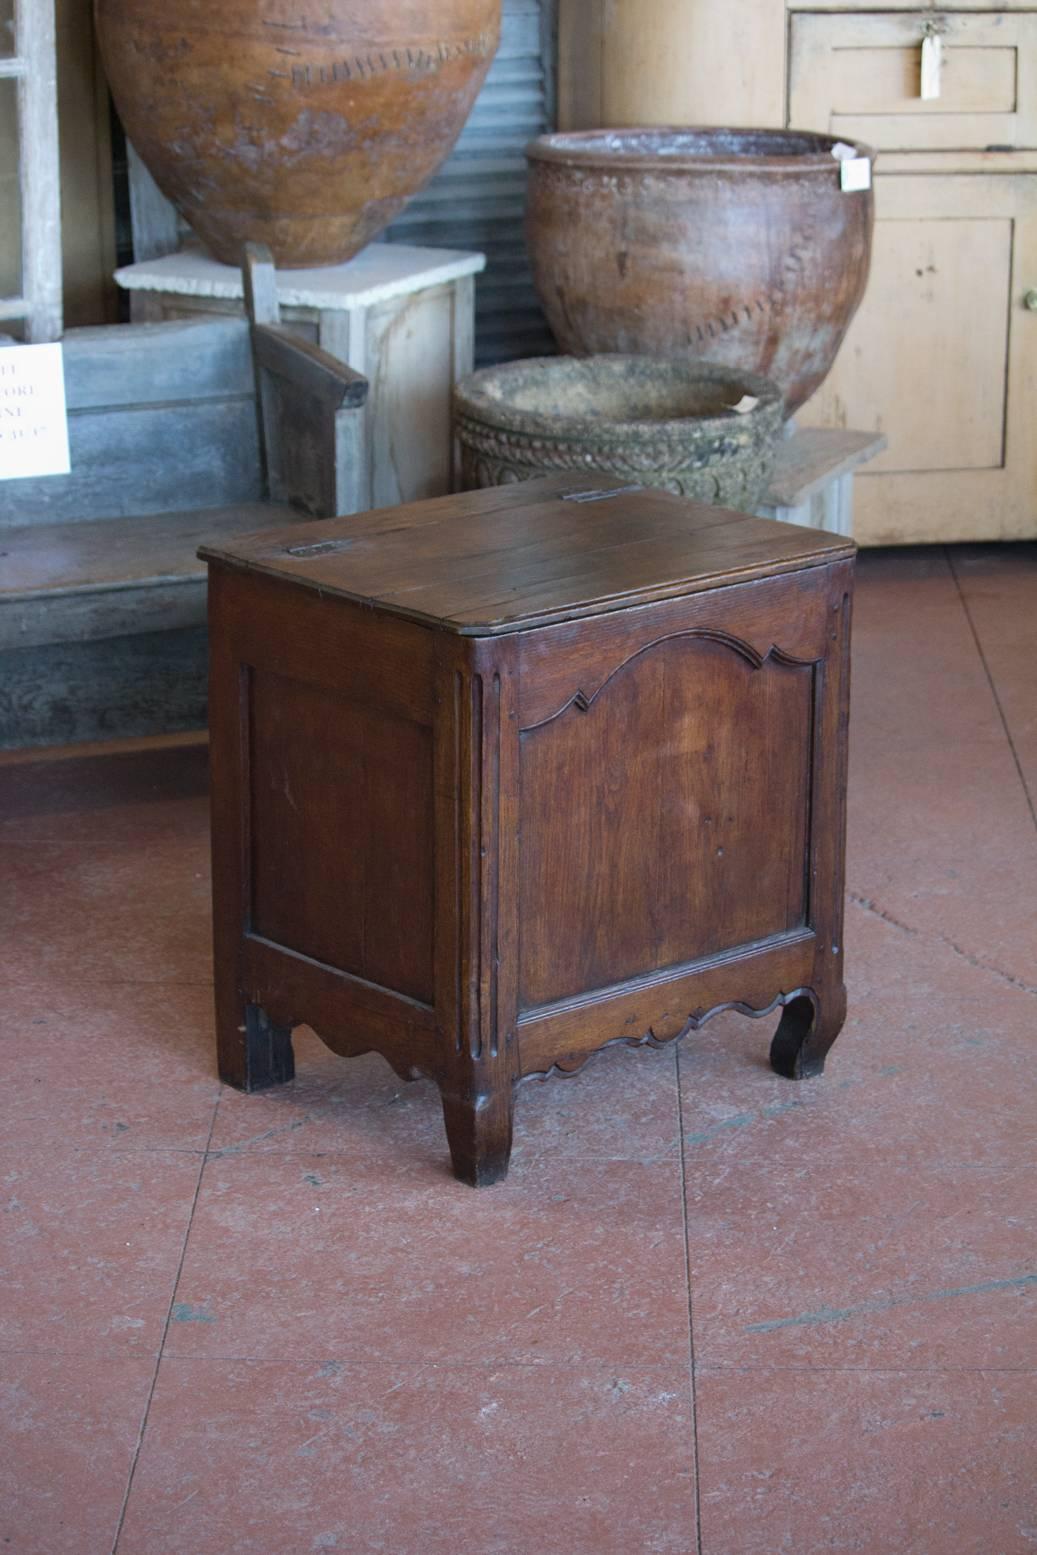 Rare early 19th century country oak paneled coffer or possibly a log box. The box has a top lift opening, shaped front legs, scalloped skirt to base and a beautiful rich patina.